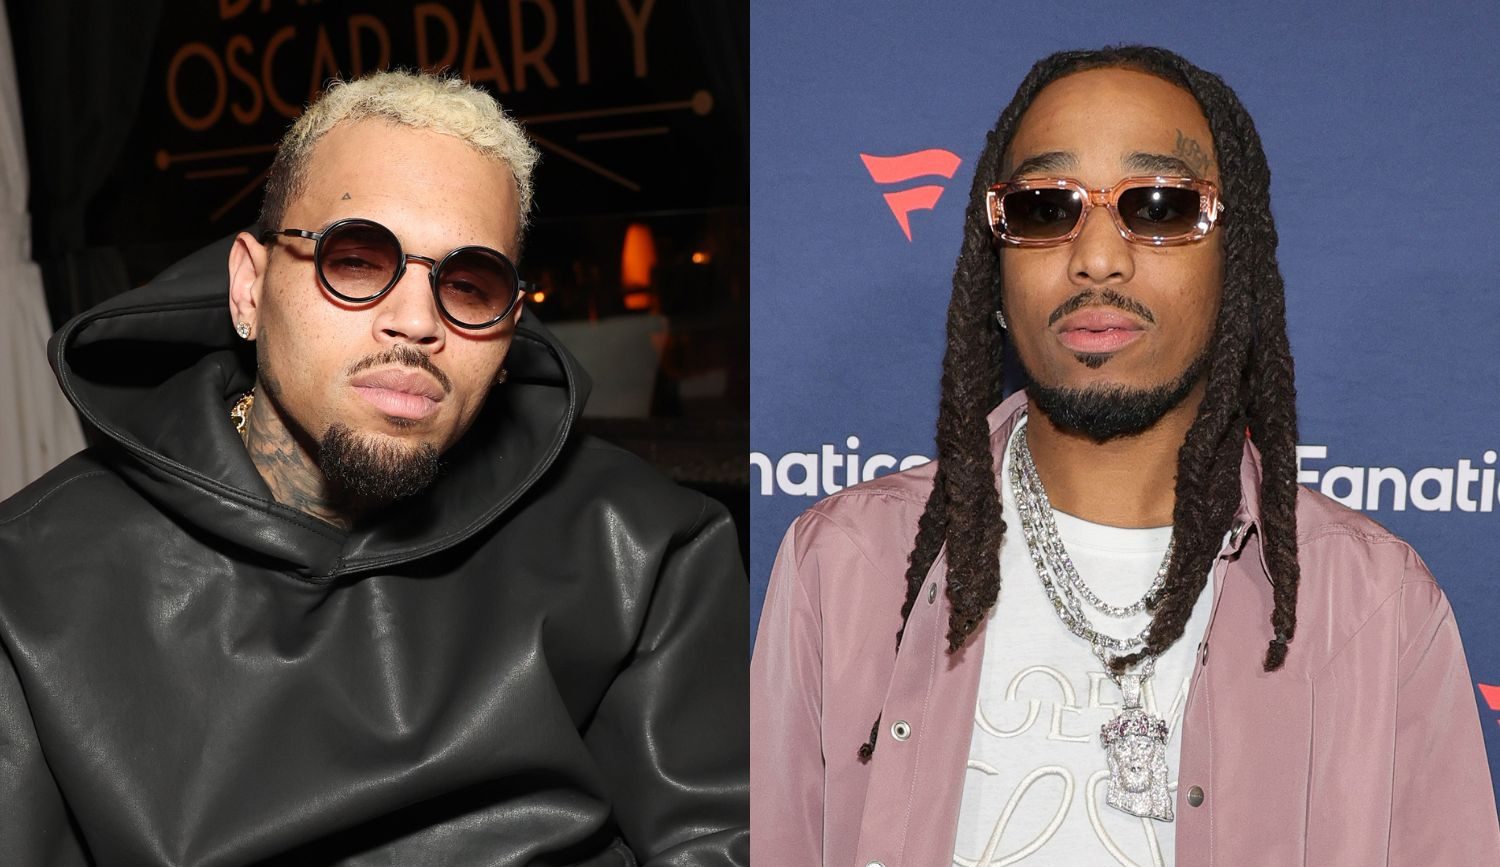 Freak/Fans Speculate Chris Brown Threw Shots At Quavo In Song 'Freak'